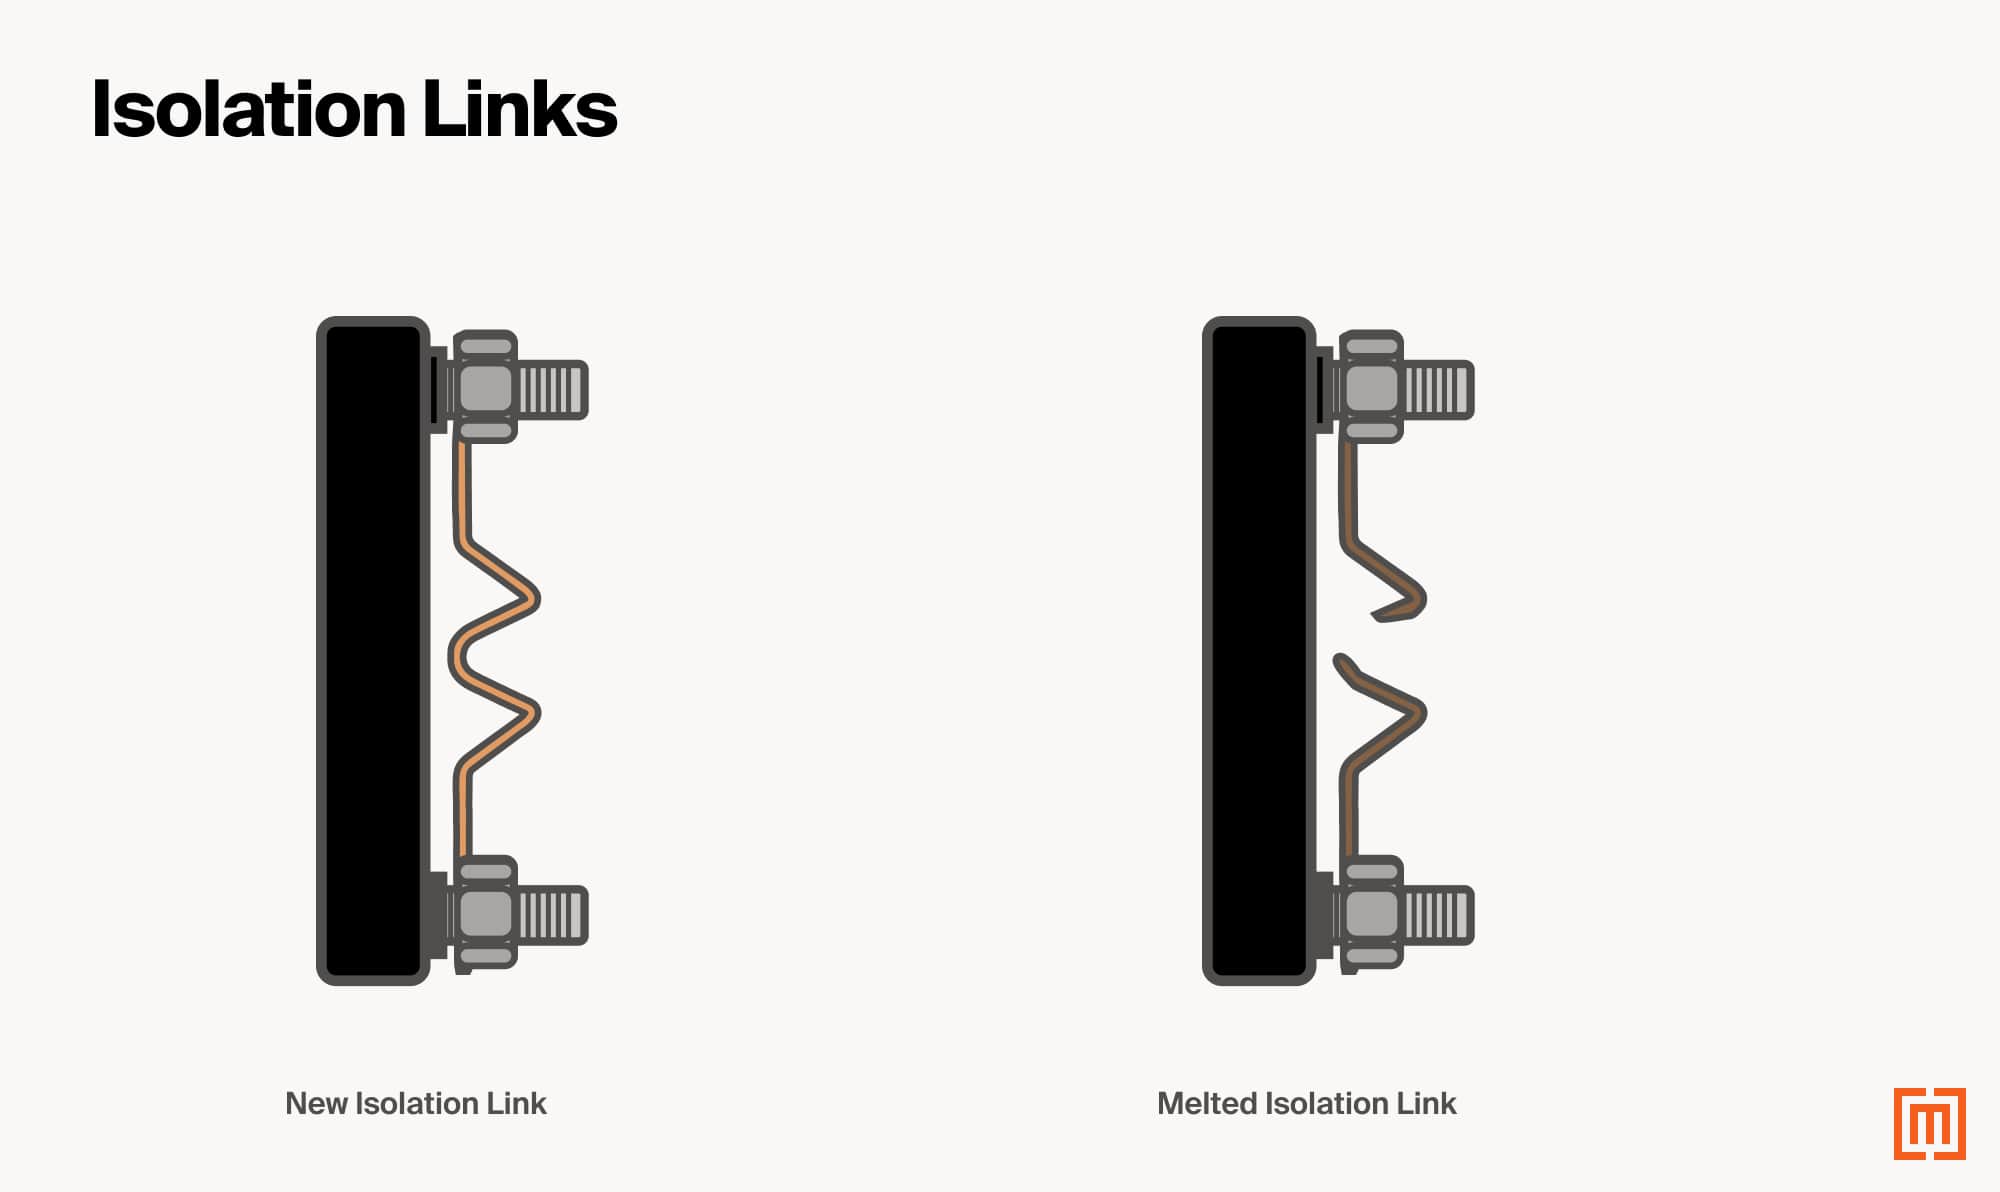 Transformer isolation links comparing a new isolation link with a melted isolation link